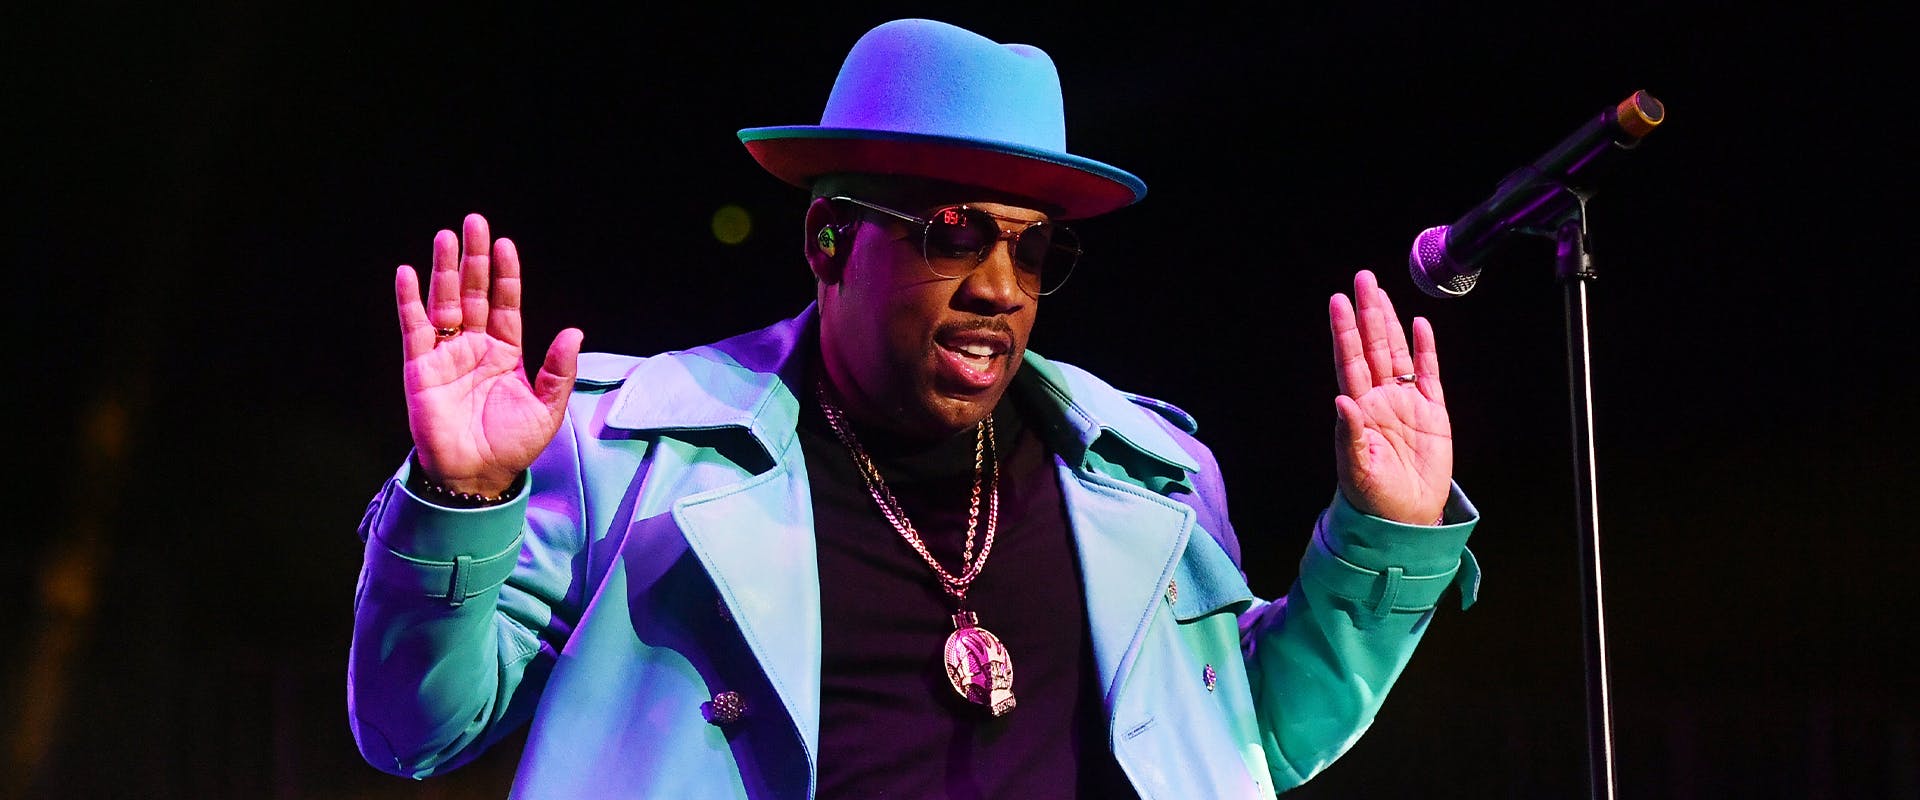 ATLANTA, GEORGIA - FEBRUARY 20: Michael Bivins of New Edition performs onstage during "The Culture Tour" at State Farm Arena on February 20, 2022 in Atlanta, Georgia